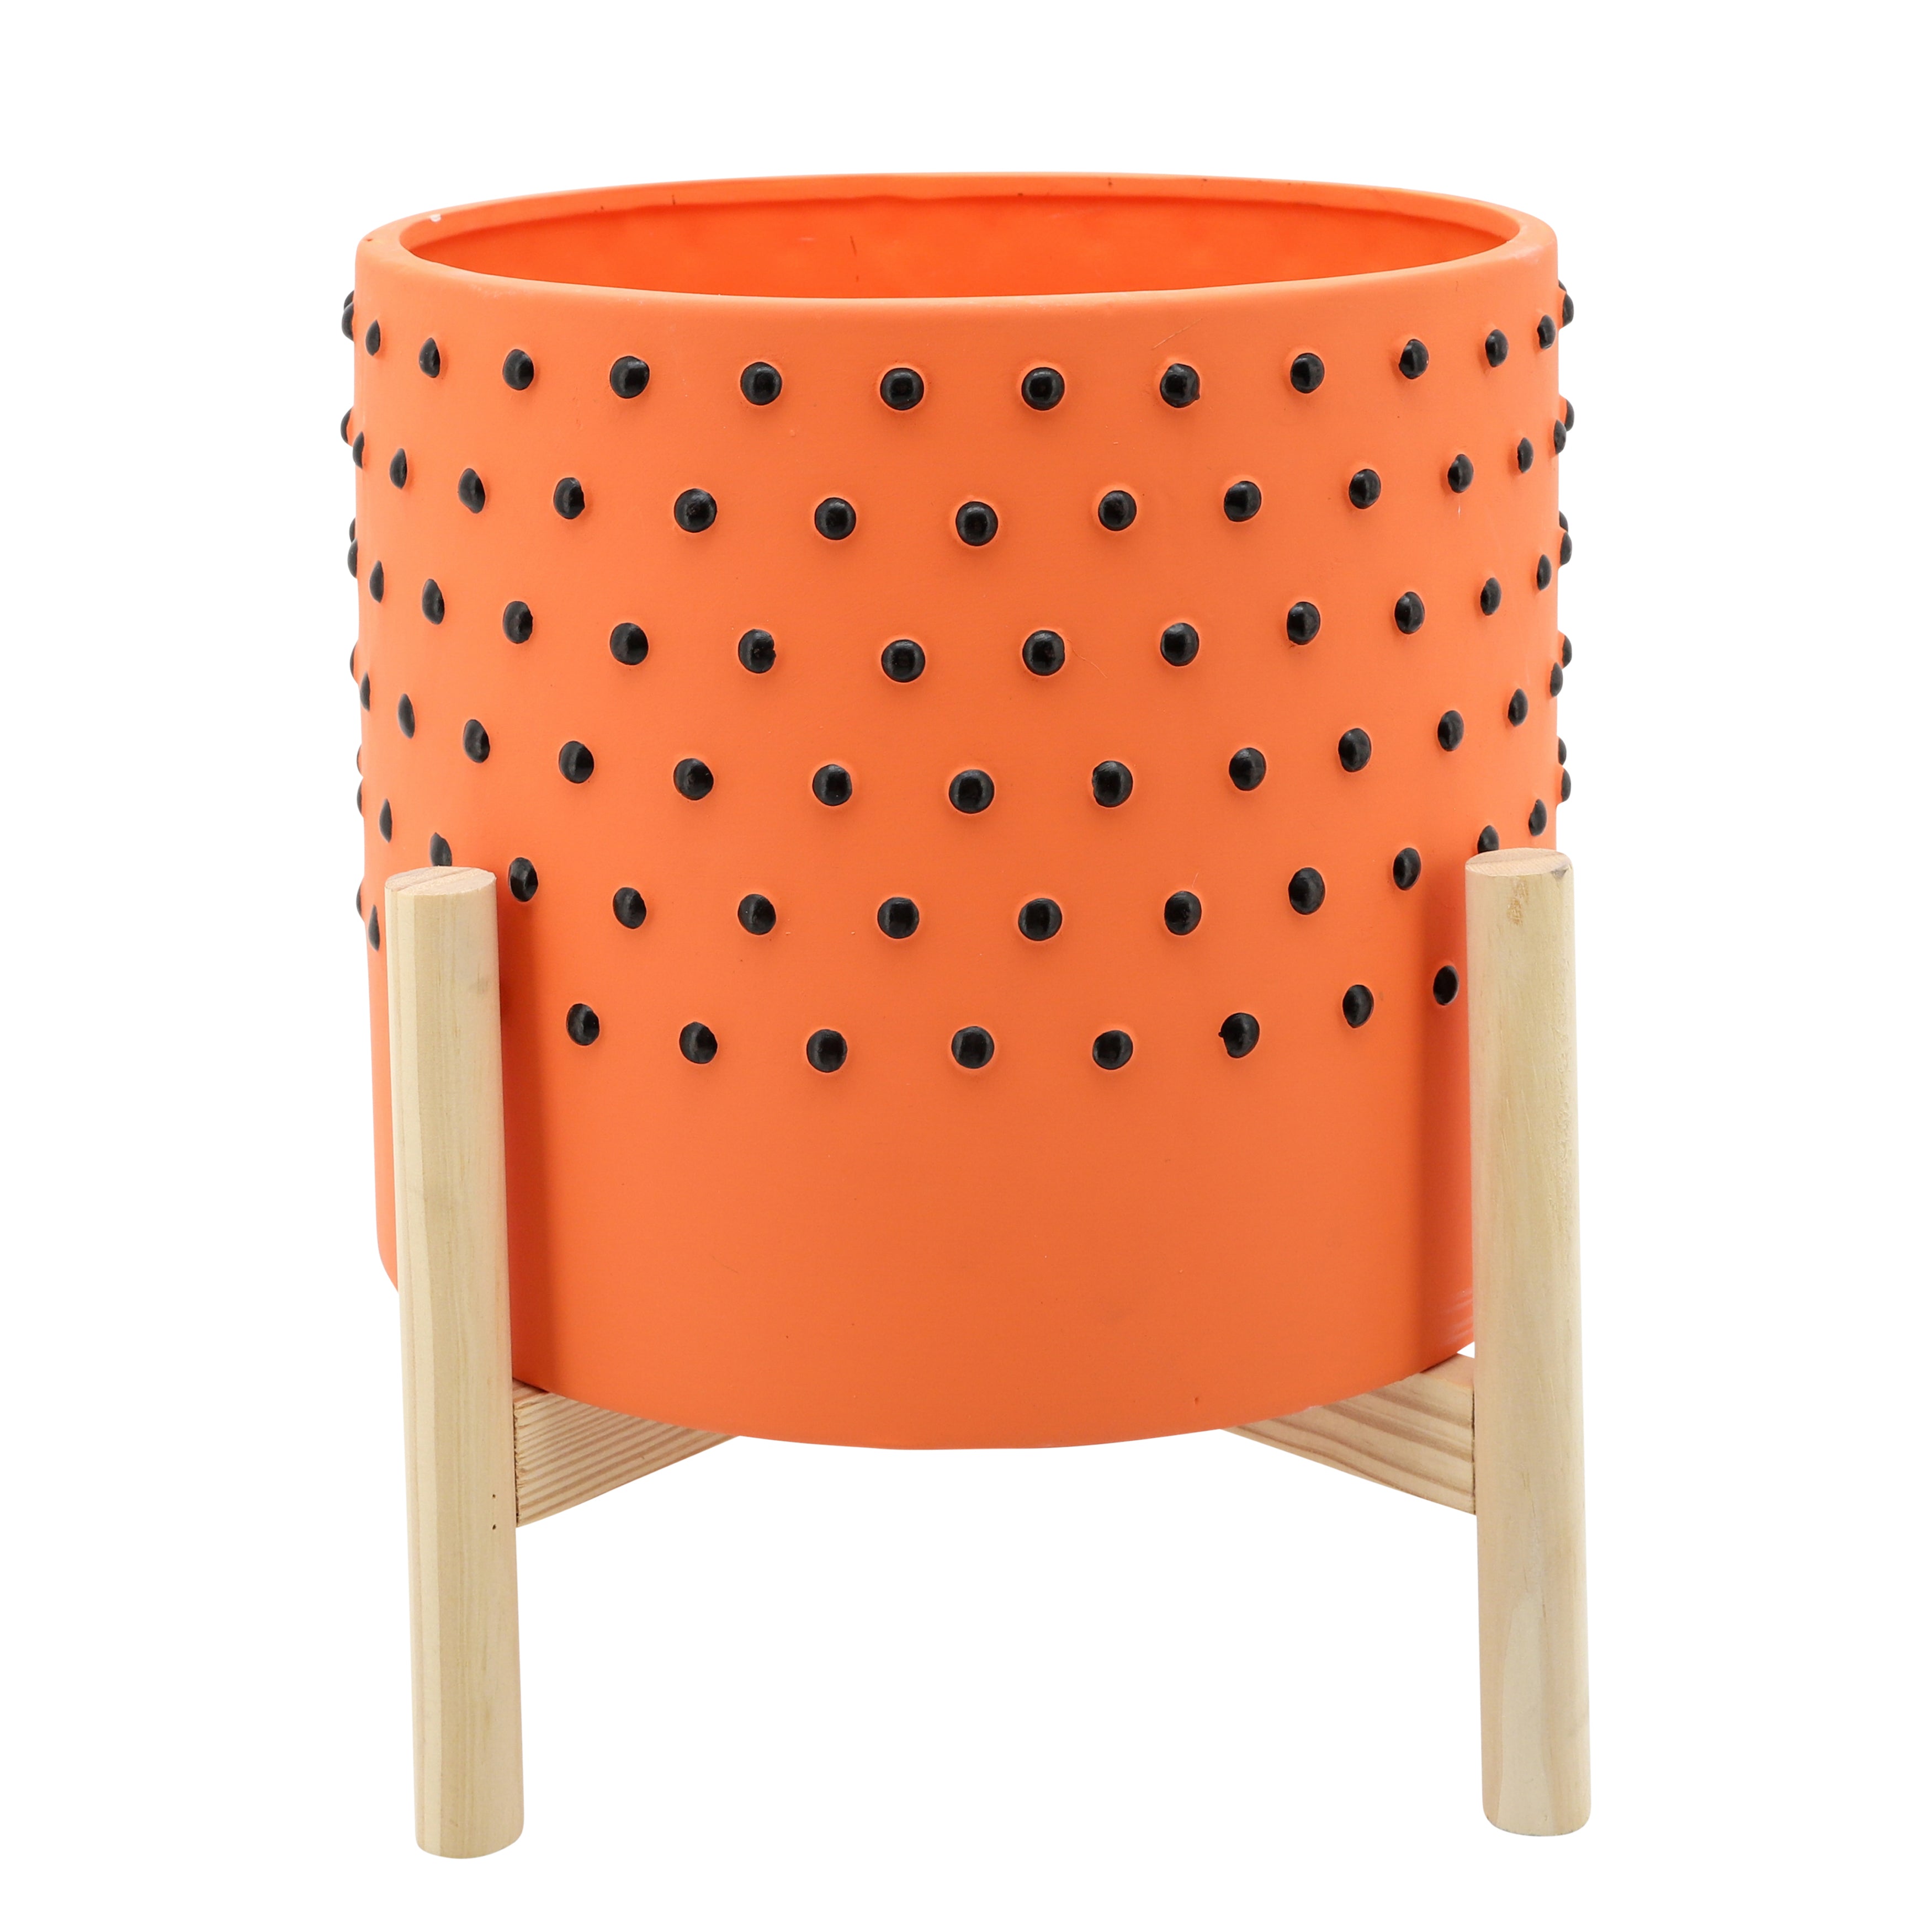 10" Dotted Planter with Wood Stand, Orange, Planters